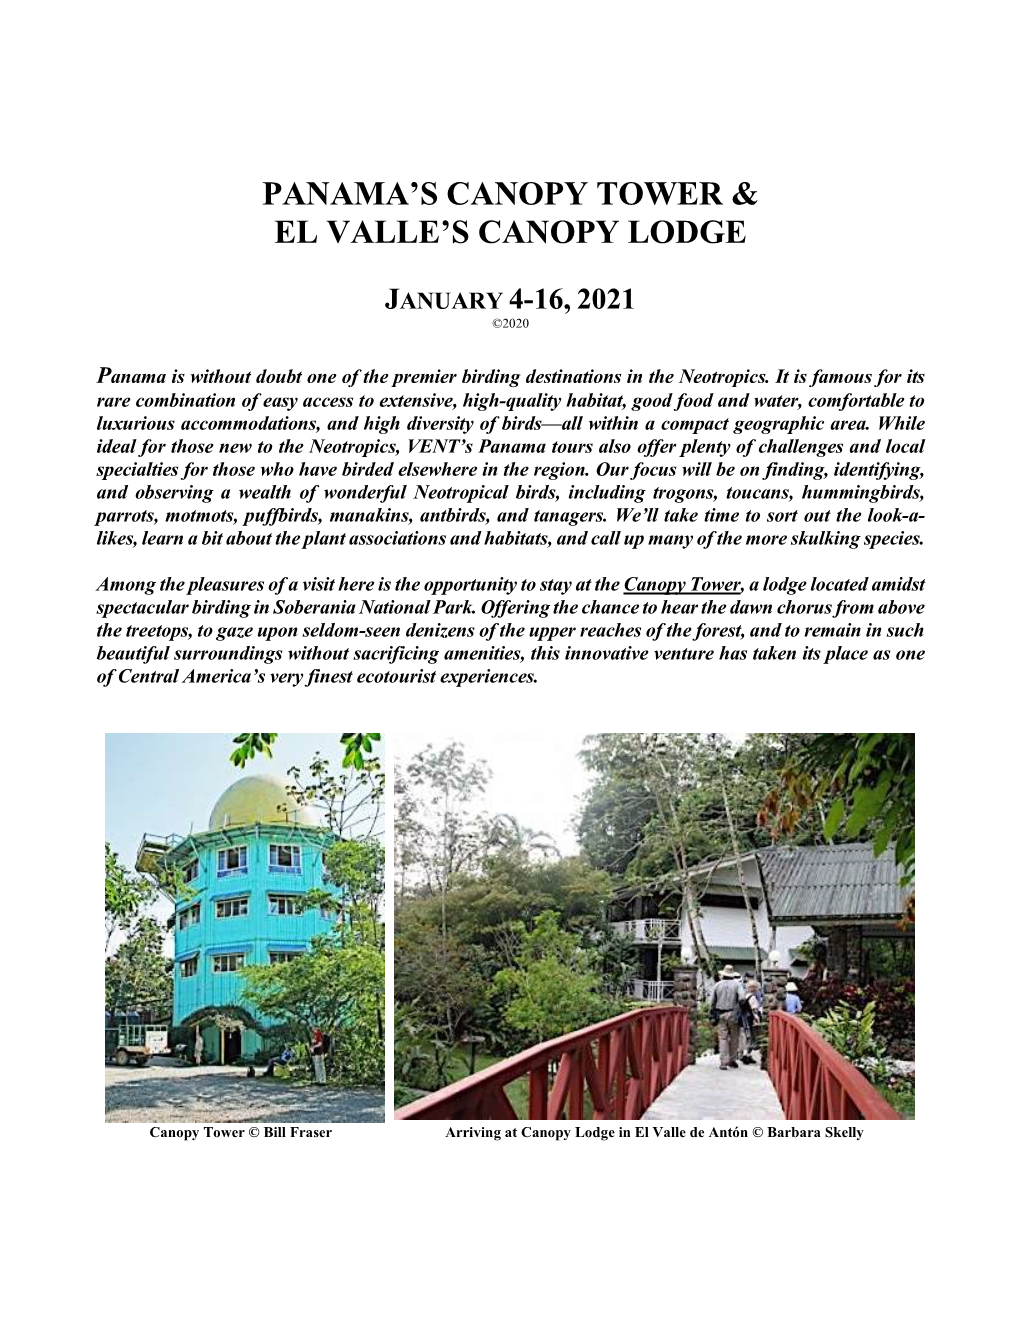 Panama's Canopy Tower & El Valle's Canopy Lodge